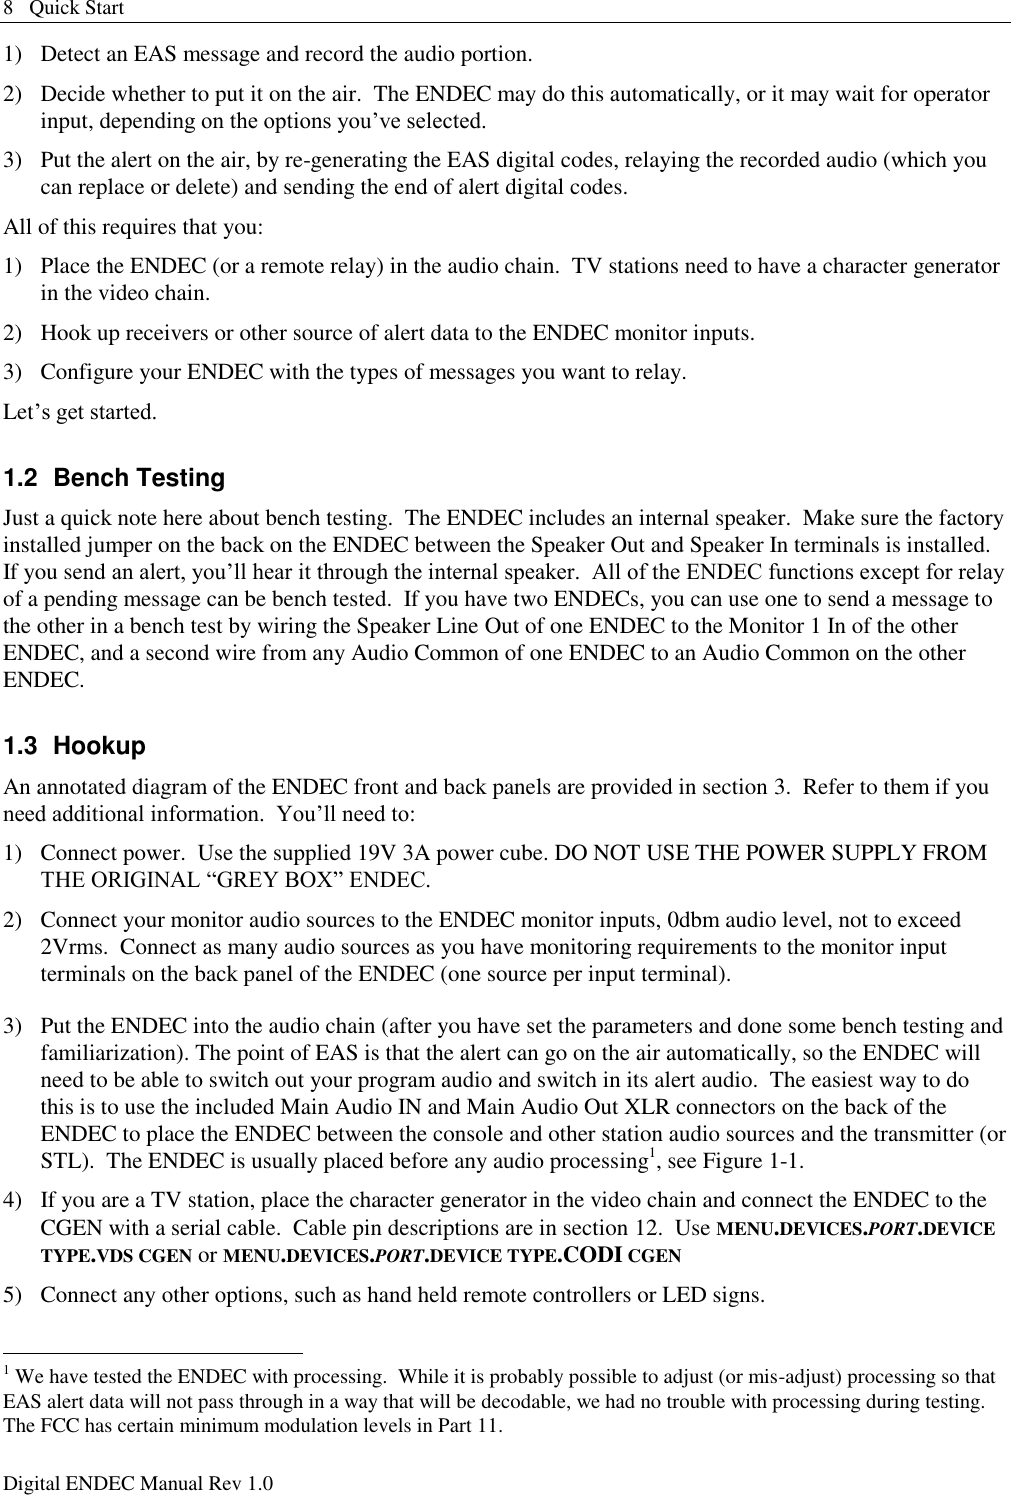 8   Quick Start Digital ENDEC Manual Rev 1.0 1)  Detect an EAS message and record the audio portion. 2)  Decide whether to put it on the air.  The ENDEC may do this automatically, or it may wait for operator input, depending on the options you‟ve selected. 3)  Put the alert on the air, by re-generating the EAS digital codes, relaying the recorded audio (which you can replace or delete) and sending the end of alert digital codes. All of this requires that you: 1)  Place the ENDEC (or a remote relay) in the audio chain.  TV stations need to have a character generator in the video chain. 2)  Hook up receivers or other source of alert data to the ENDEC monitor inputs. 3)  Configure your ENDEC with the types of messages you want to relay. Let‟s get started. 1.2  Bench Testing Just a quick note here about bench testing.  The ENDEC includes an internal speaker.  Make sure the factory installed jumper on the back on the ENDEC between the Speaker Out and Speaker In terminals is installed.  If you send an alert, you‟ll hear it through the internal speaker.  All of the ENDEC functions except for relay of a pending message can be bench tested.  If you have two ENDECs, you can use one to send a message to the other in a bench test by wiring the Speaker Line Out of one ENDEC to the Monitor 1 In of the other ENDEC, and a second wire from any Audio Common of one ENDEC to an Audio Common on the other ENDEC. 1.3  Hookup An annotated diagram of the ENDEC front and back panels are provided in section 3.  Refer to them if you need additional information.  You‟ll need to: 1)  Connect power.  Use the supplied 19V 3A power cube. DO NOT USE THE POWER SUPPLY FROM THE ORIGINAL “GREY BOX” ENDEC. 2)  Connect your monitor audio sources to the ENDEC monitor inputs, 0dbm audio level, not to exceed 2Vrms.  Connect as many audio sources as you have monitoring requirements to the monitor input terminals on the back panel of the ENDEC (one source per input terminal).   3)  Put the ENDEC into the audio chain (after you have set the parameters and done some bench testing and familiarization). The point of EAS is that the alert can go on the air automatically, so the ENDEC will need to be able to switch out your program audio and switch in its alert audio.  The easiest way to do this is to use the included Main Audio IN and Main Audio Out XLR connectors on the back of the ENDEC to place the ENDEC between the console and other station audio sources and the transmitter (or STL).  The ENDEC is usually placed before any audio processing1, see Figure 1-1. 4)  If you are a TV station, place the character generator in the video chain and connect the ENDEC to the CGEN with a serial cable.  Cable pin descriptions are in section 12.  Use MENU.DEVICES.PORT.DEVICE TYPE.VDS CGEN or MENU.DEVICES.PORT.DEVICE TYPE.CODI CGEN 5)  Connect any other options, such as hand held remote controllers or LED signs.                                                       1 We have tested the ENDEC with processing.  While it is probably possible to adjust (or mis-adjust) processing so that EAS alert data will not pass through in a way that will be decodable, we had no trouble with processing during testing.  The FCC has certain minimum modulation levels in Part 11. 